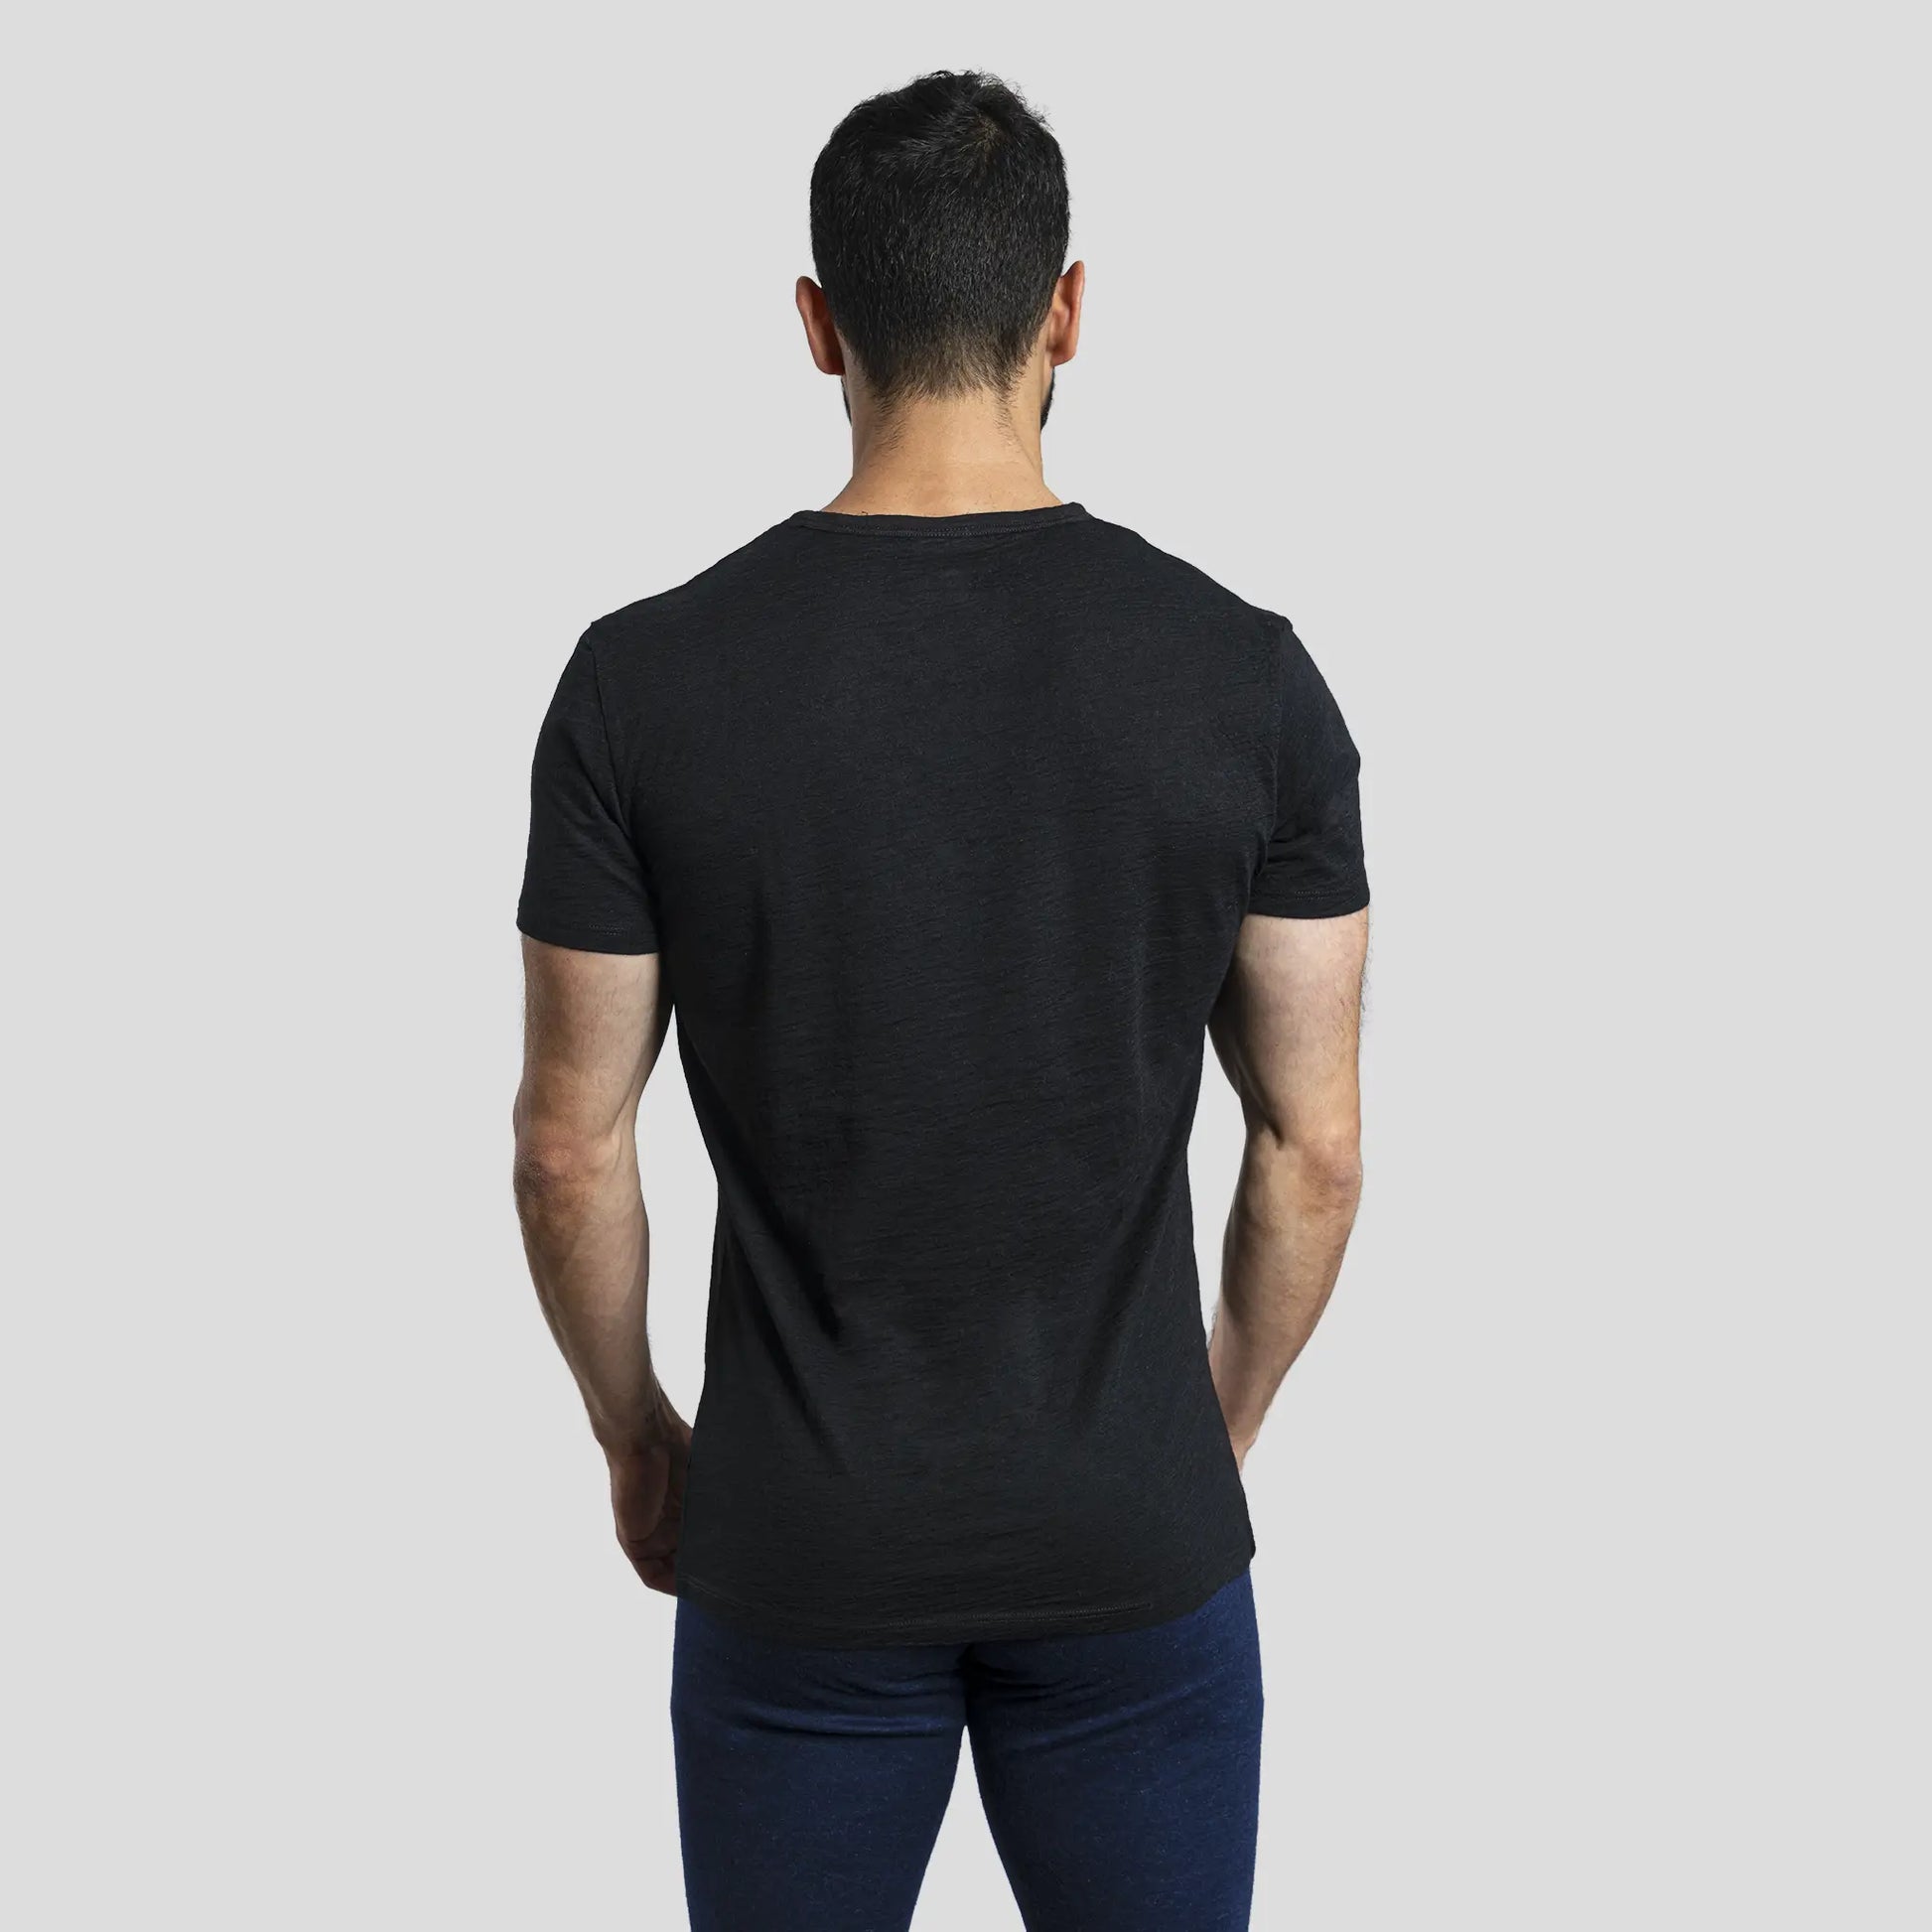 Plain Mens Sports T Shirts 100 Percent Cotton Made Black And Red